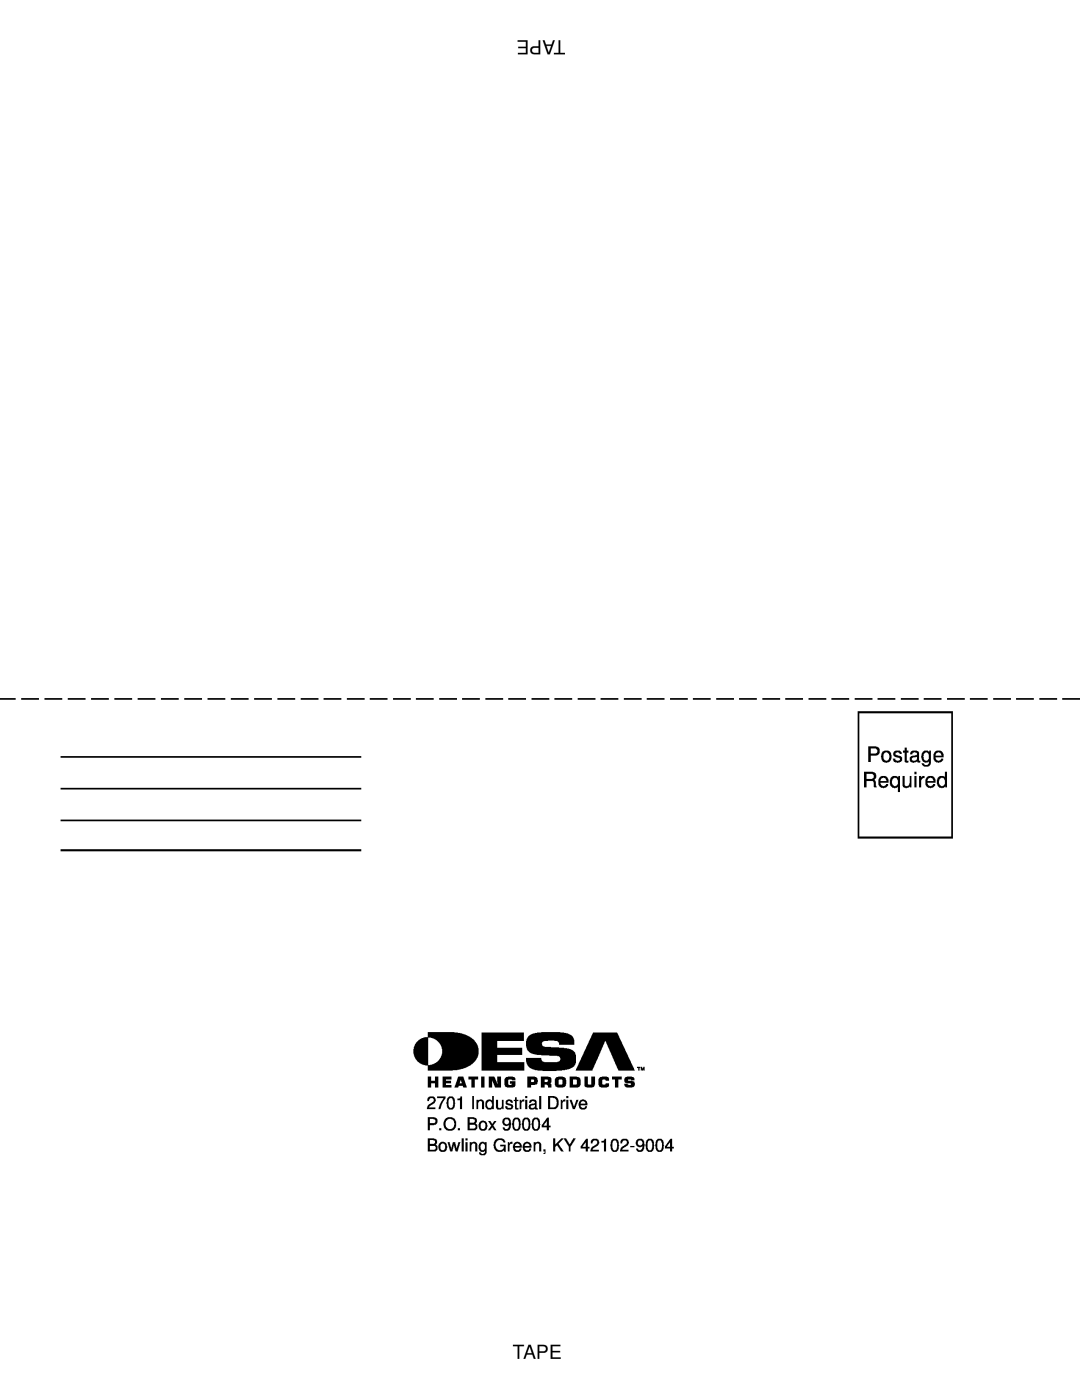 Desa BLP375AT owner manual Postage Required, Tape, Industrial Drive P.O. Box Bowling Green, KY 